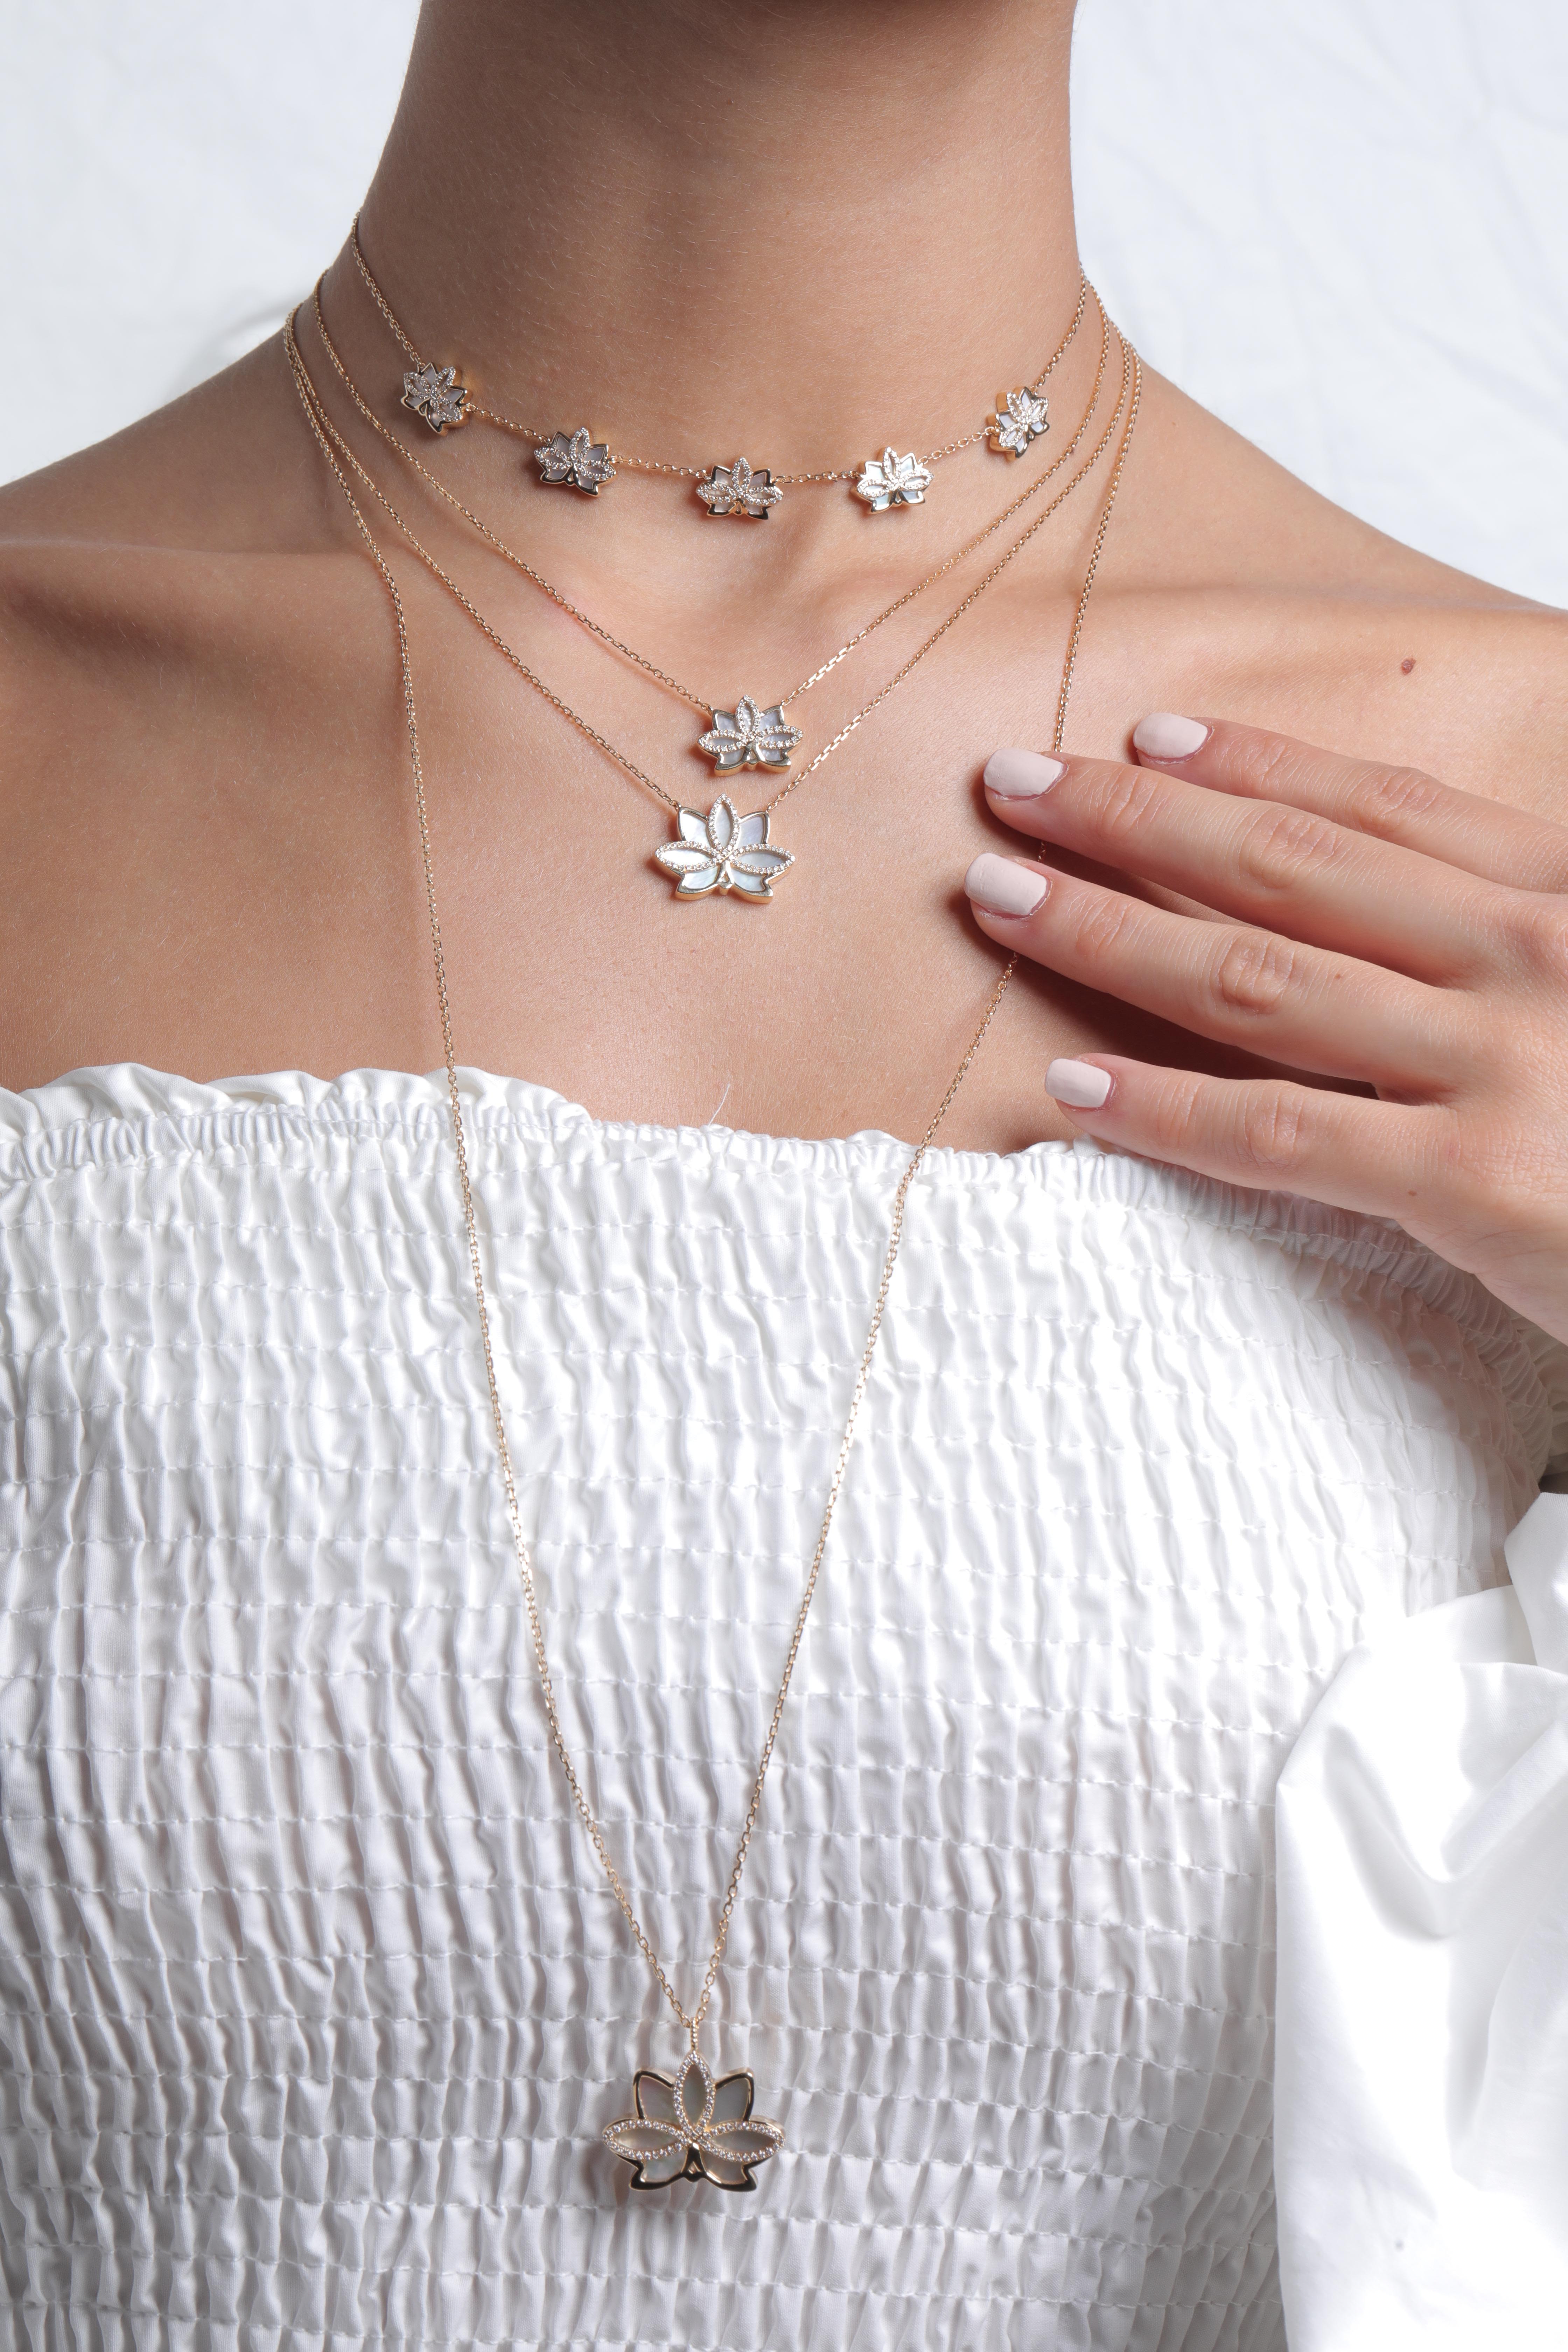 The Nelumbo Long necklace has a subtle yet significant design that offers elegance as well. This piece combines nature’s radiance with our signature attention to detail- because you deserves it!

At Sedra Jewelry, we believe jewelry should be about